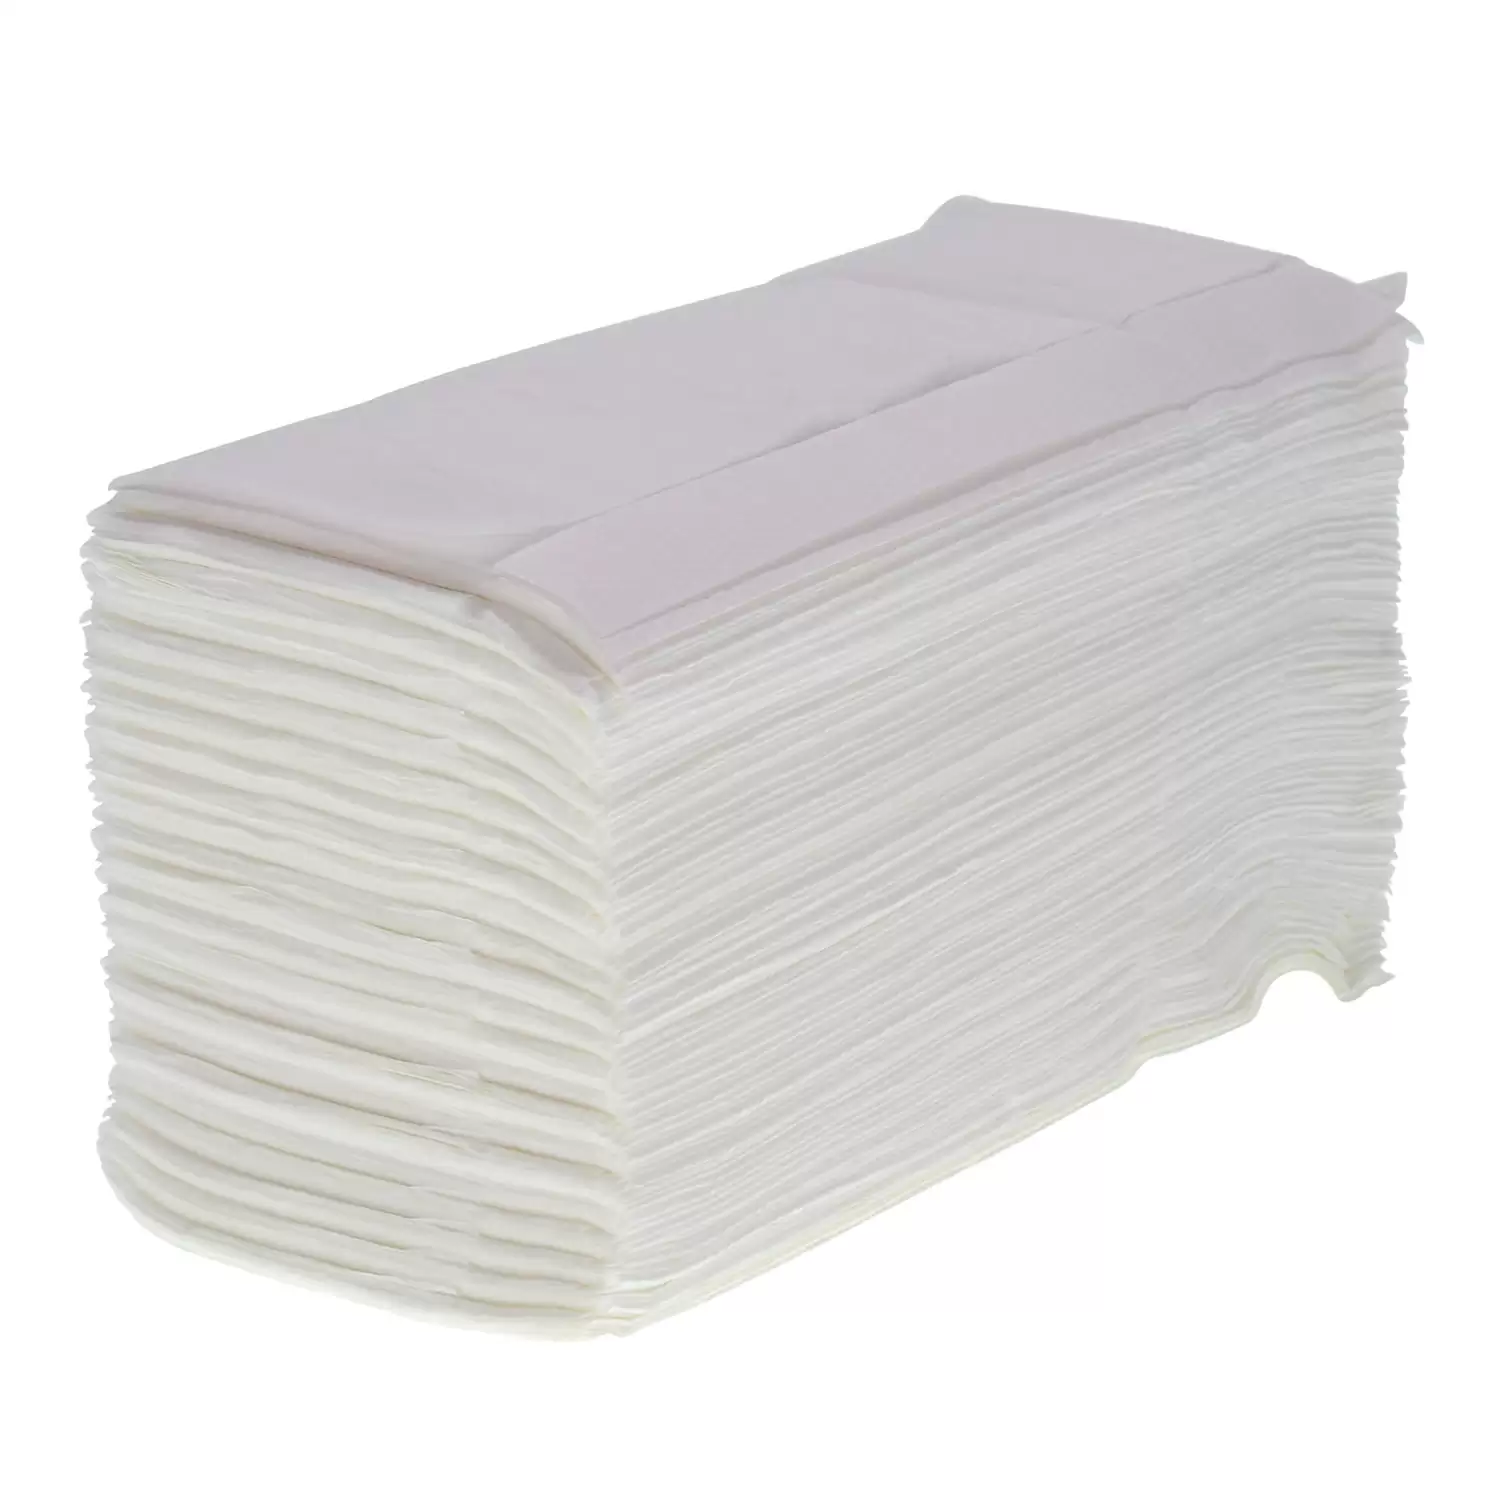 Soclean Z Fold Paper Towel White 1 Ply 6000 - Gompels - Care & Nursery ...